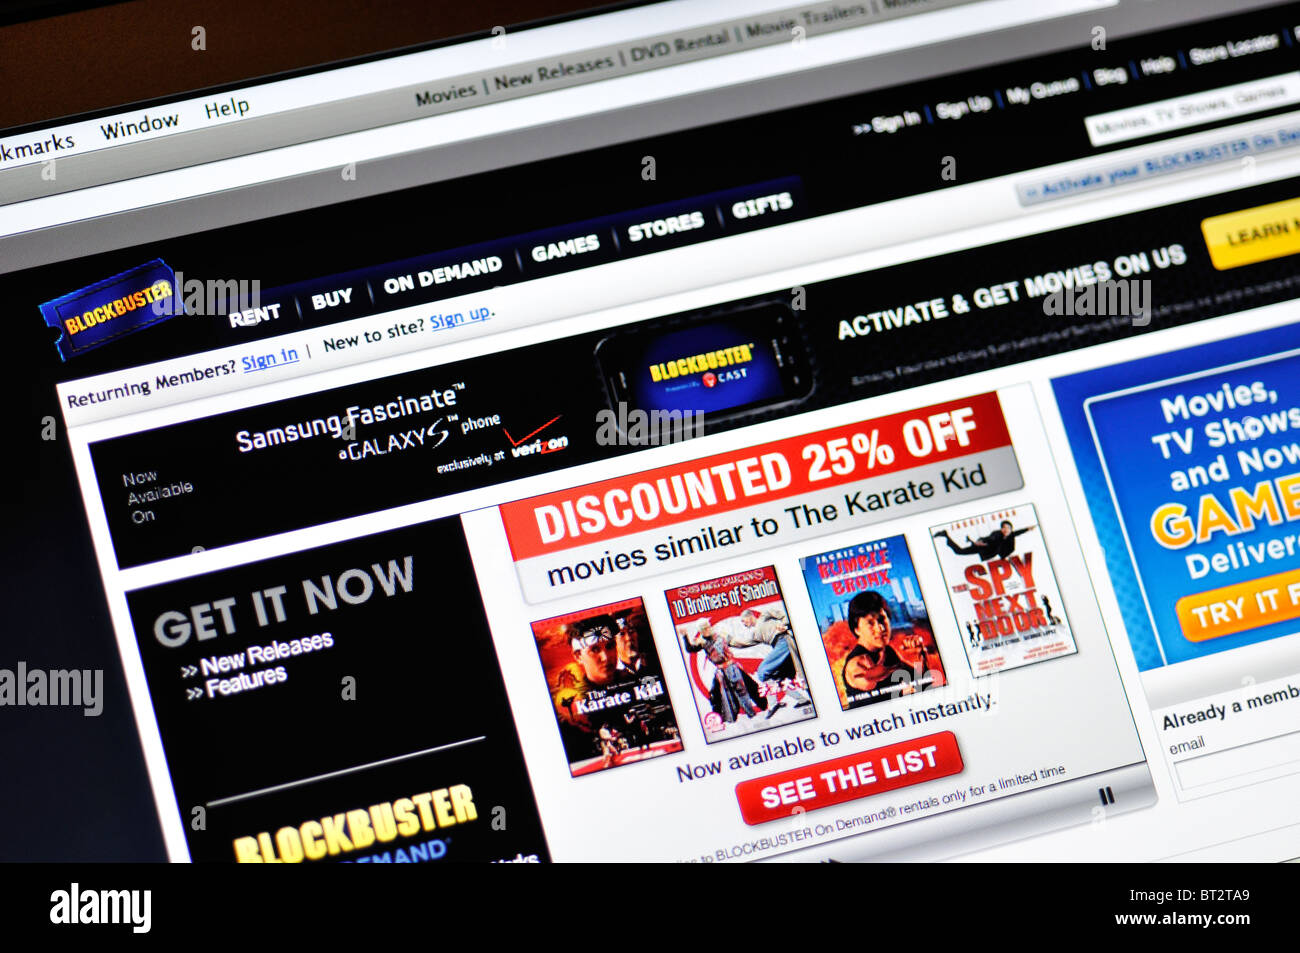 Blockbuster website - online movie and video game rental Stock Photo